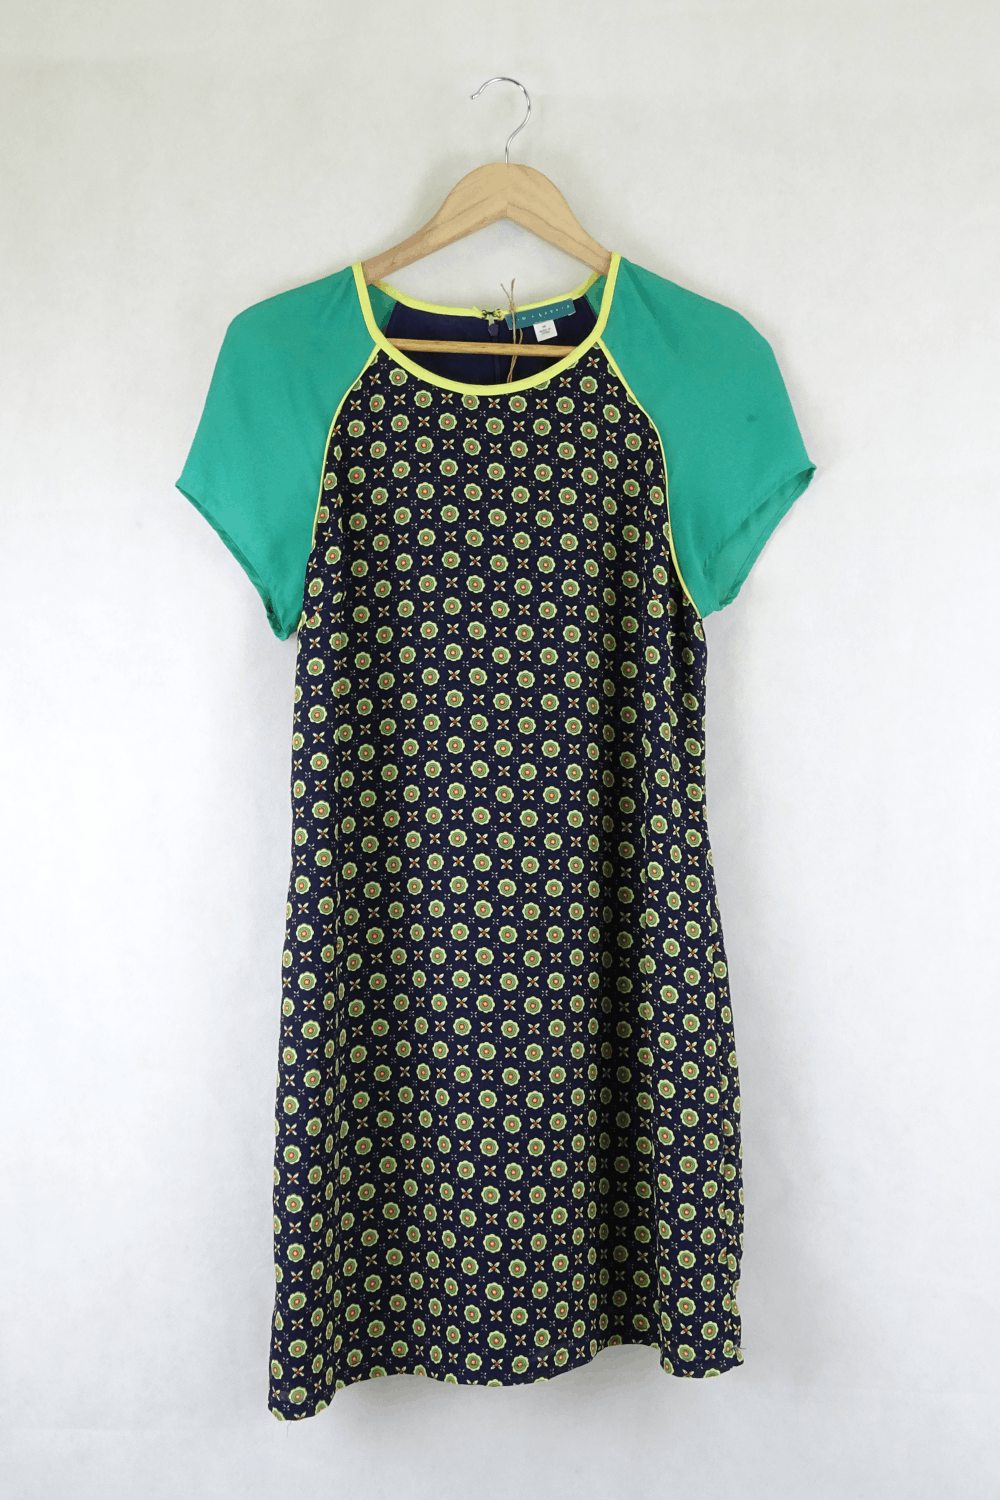 Pims + Larkin Patterned Green And Navy Dress M